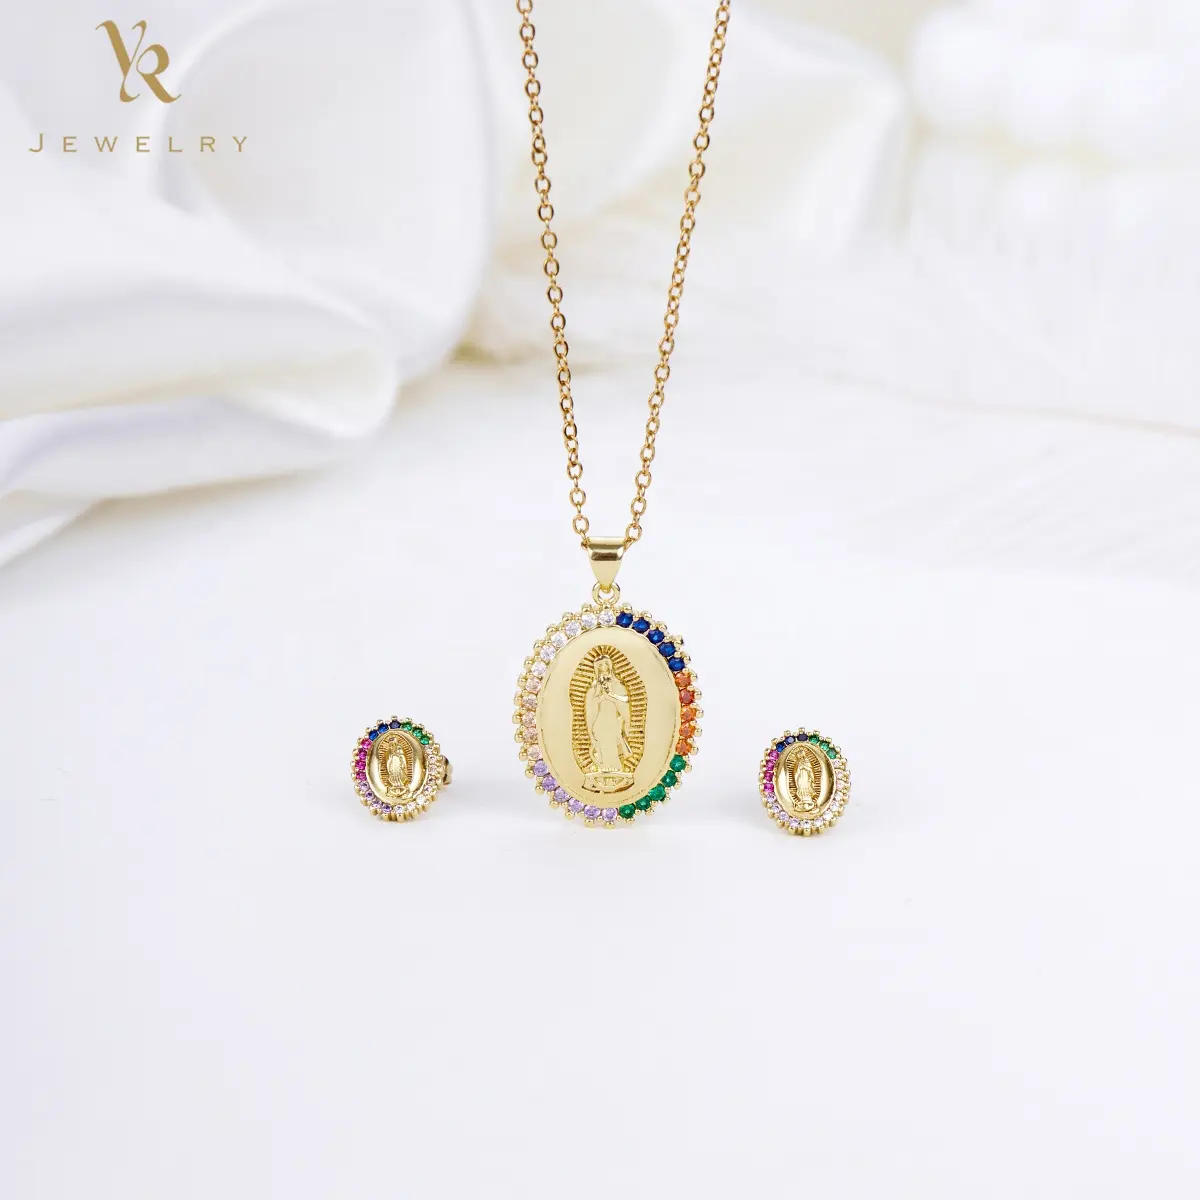 FS4045-4 Trendy Style Jewelry Supplies Gold Plated Oval-shaped Virgin Mary Jewellery Set Earrings And Necklaces For Women Men